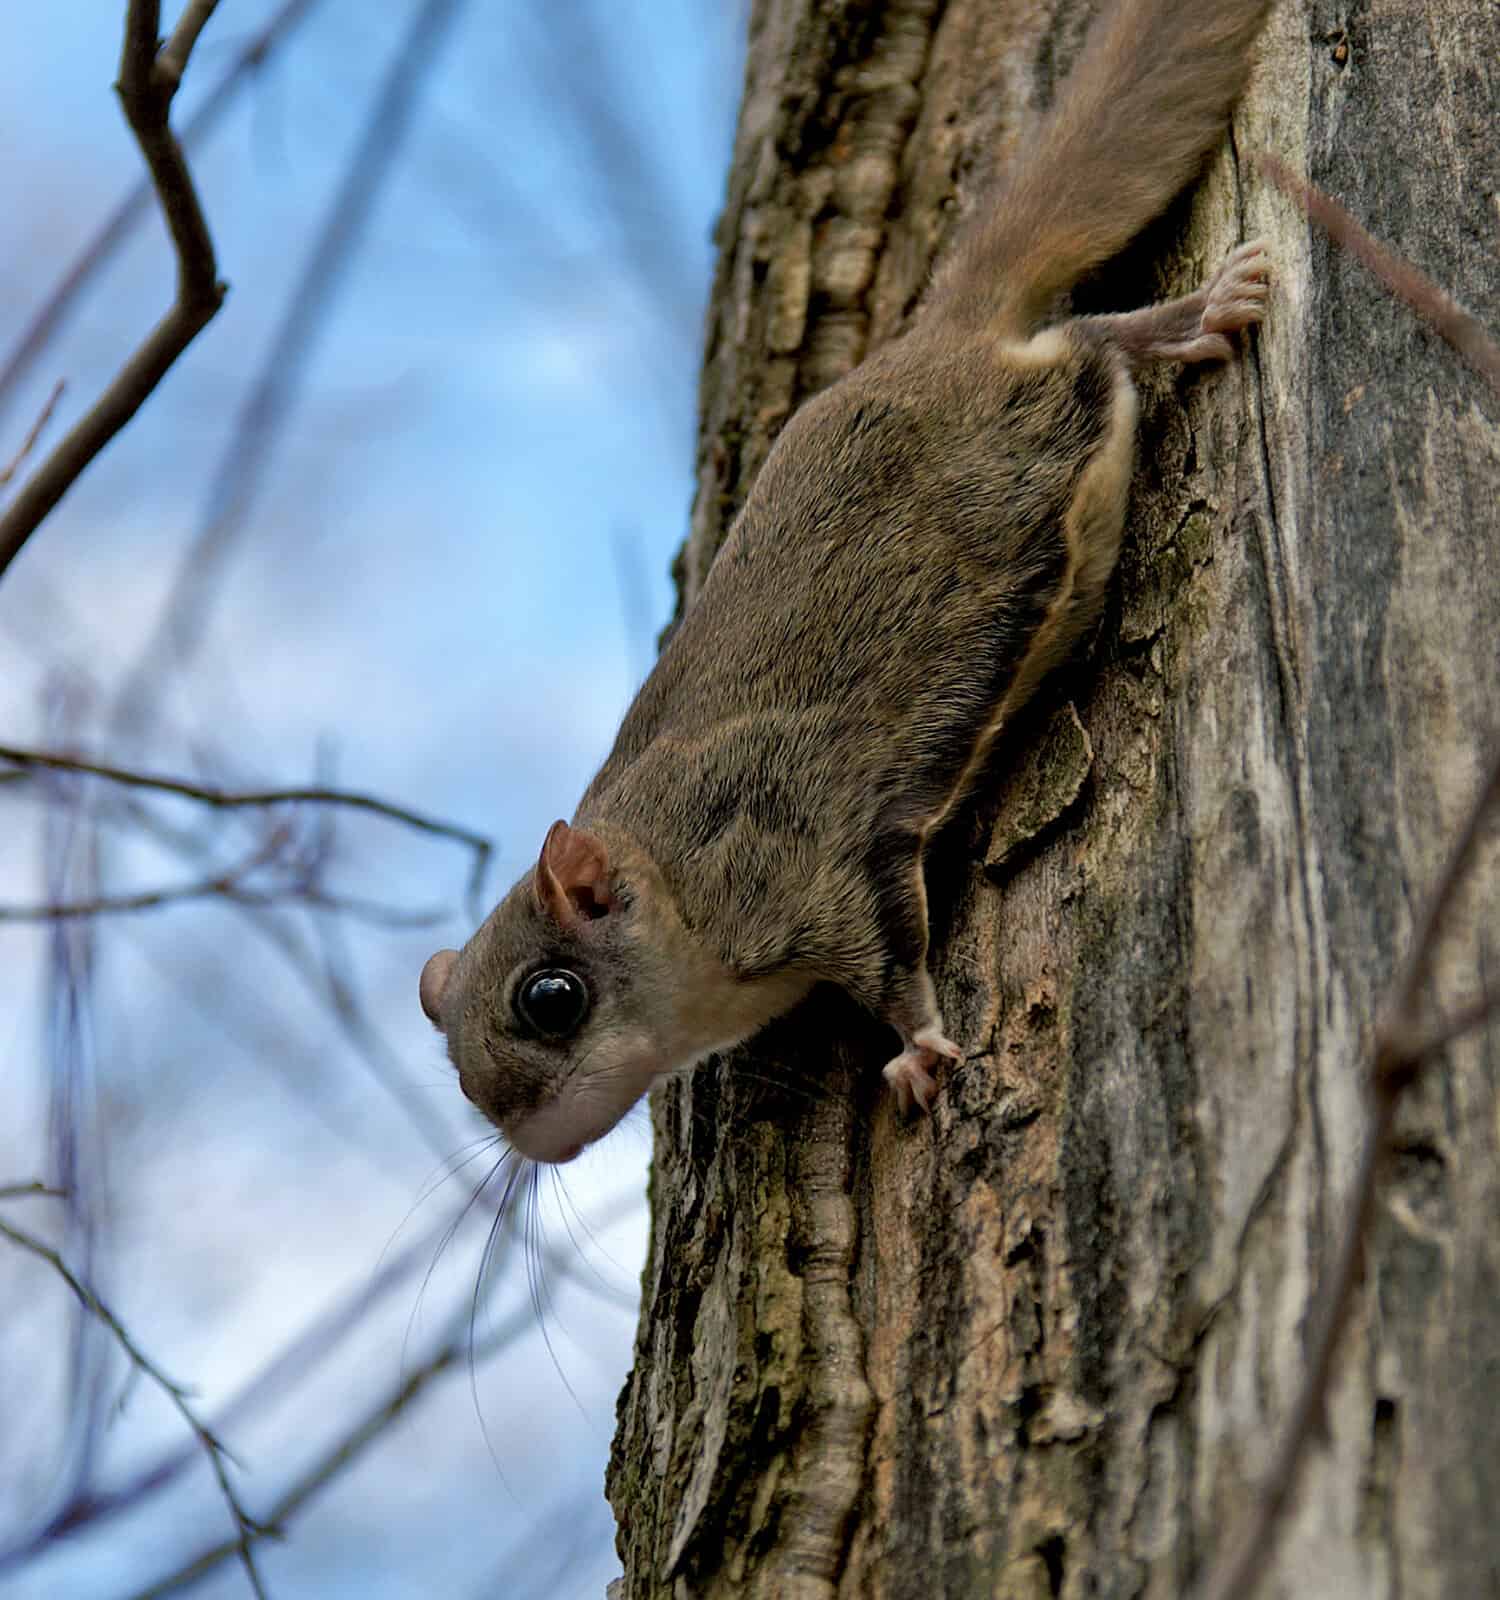  Northern flying squirrels (Glaucomys sabrinus) on a tree trunk